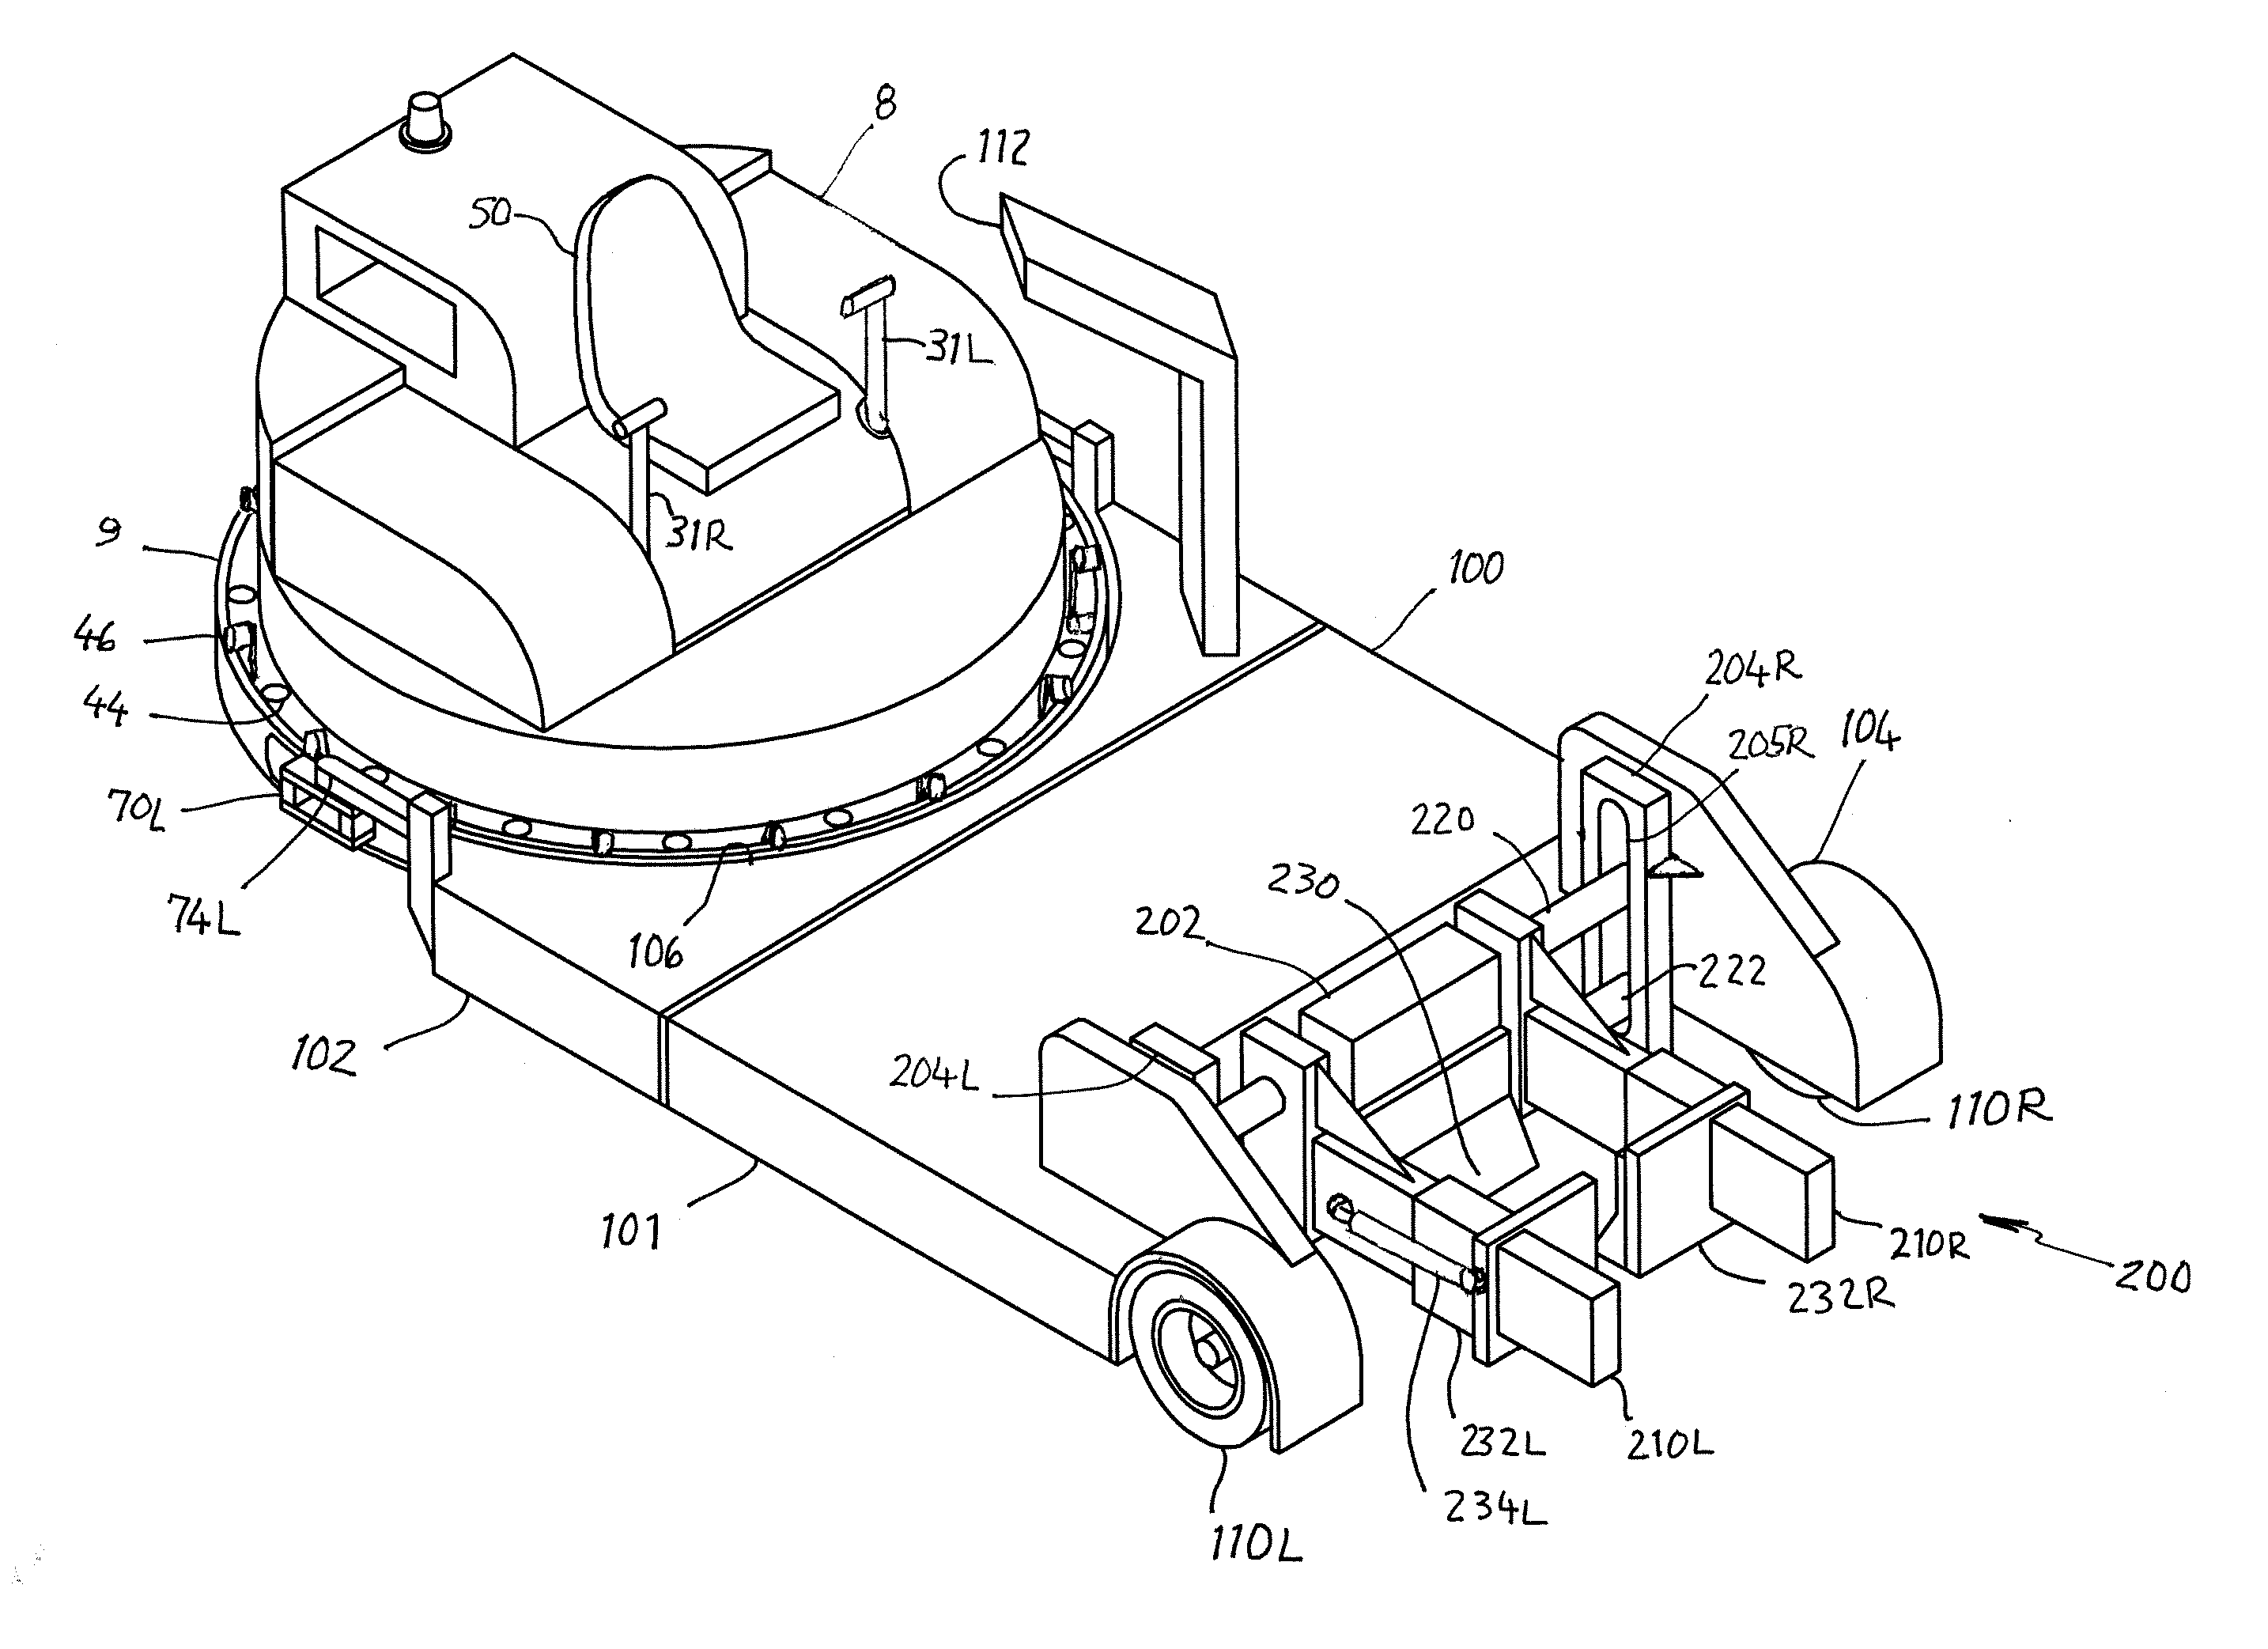 Omni-Directional Towbarless Aircraft Transporter and Method for Moving Aircraft